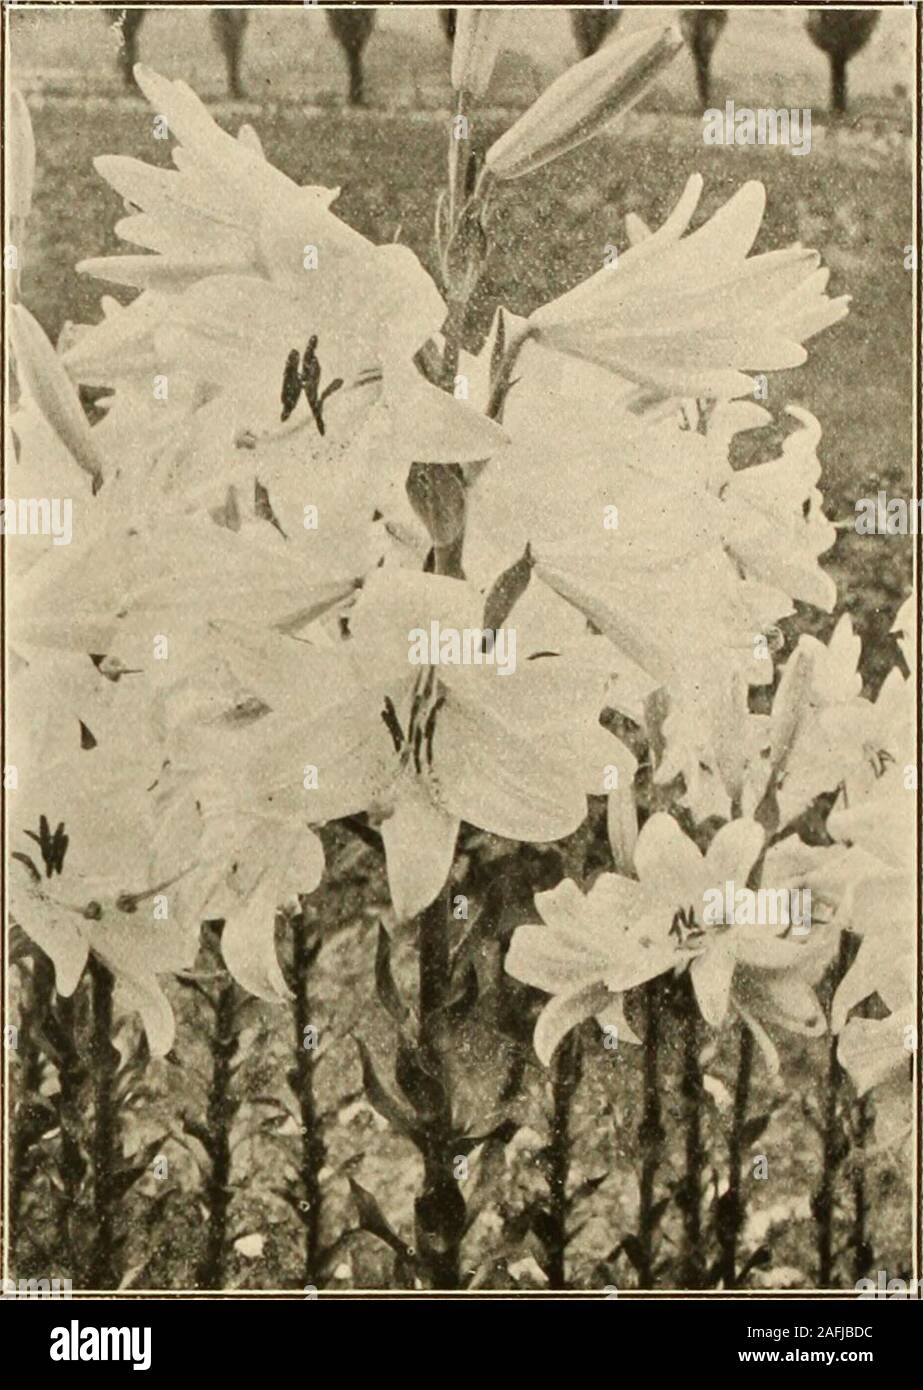 . Farquhar's autumn catalogue : 1913. LILIUM LONGIFLORUM. {Japan Grown.) Qiganteum. The flowers are of large size, perfect in form and of superior substance;stems blackish. Bulbs, 7 to 9 in. circ.15c. each; $1.50 per dozen; $10.00 per100. Bulbs, 9 to 10 in. circ. 25c. each;$2.50 per dozen; $18.00 per 100. Formosa. An early type, blooming withL. Harrisii. Bulbs ready for delivery inAugust. Bulbs, 7 to 9 in. circ. 15c. each;$1.50 per dozen; $10.00 per 100. Bulbs9 to 10 in. circ. 25c. each; $2.50 per dozen;$18.00 per 100. Lilium Harrisii. Sargentije and Myriophyllum. See page 26. Six bulbs of one Stock Photo